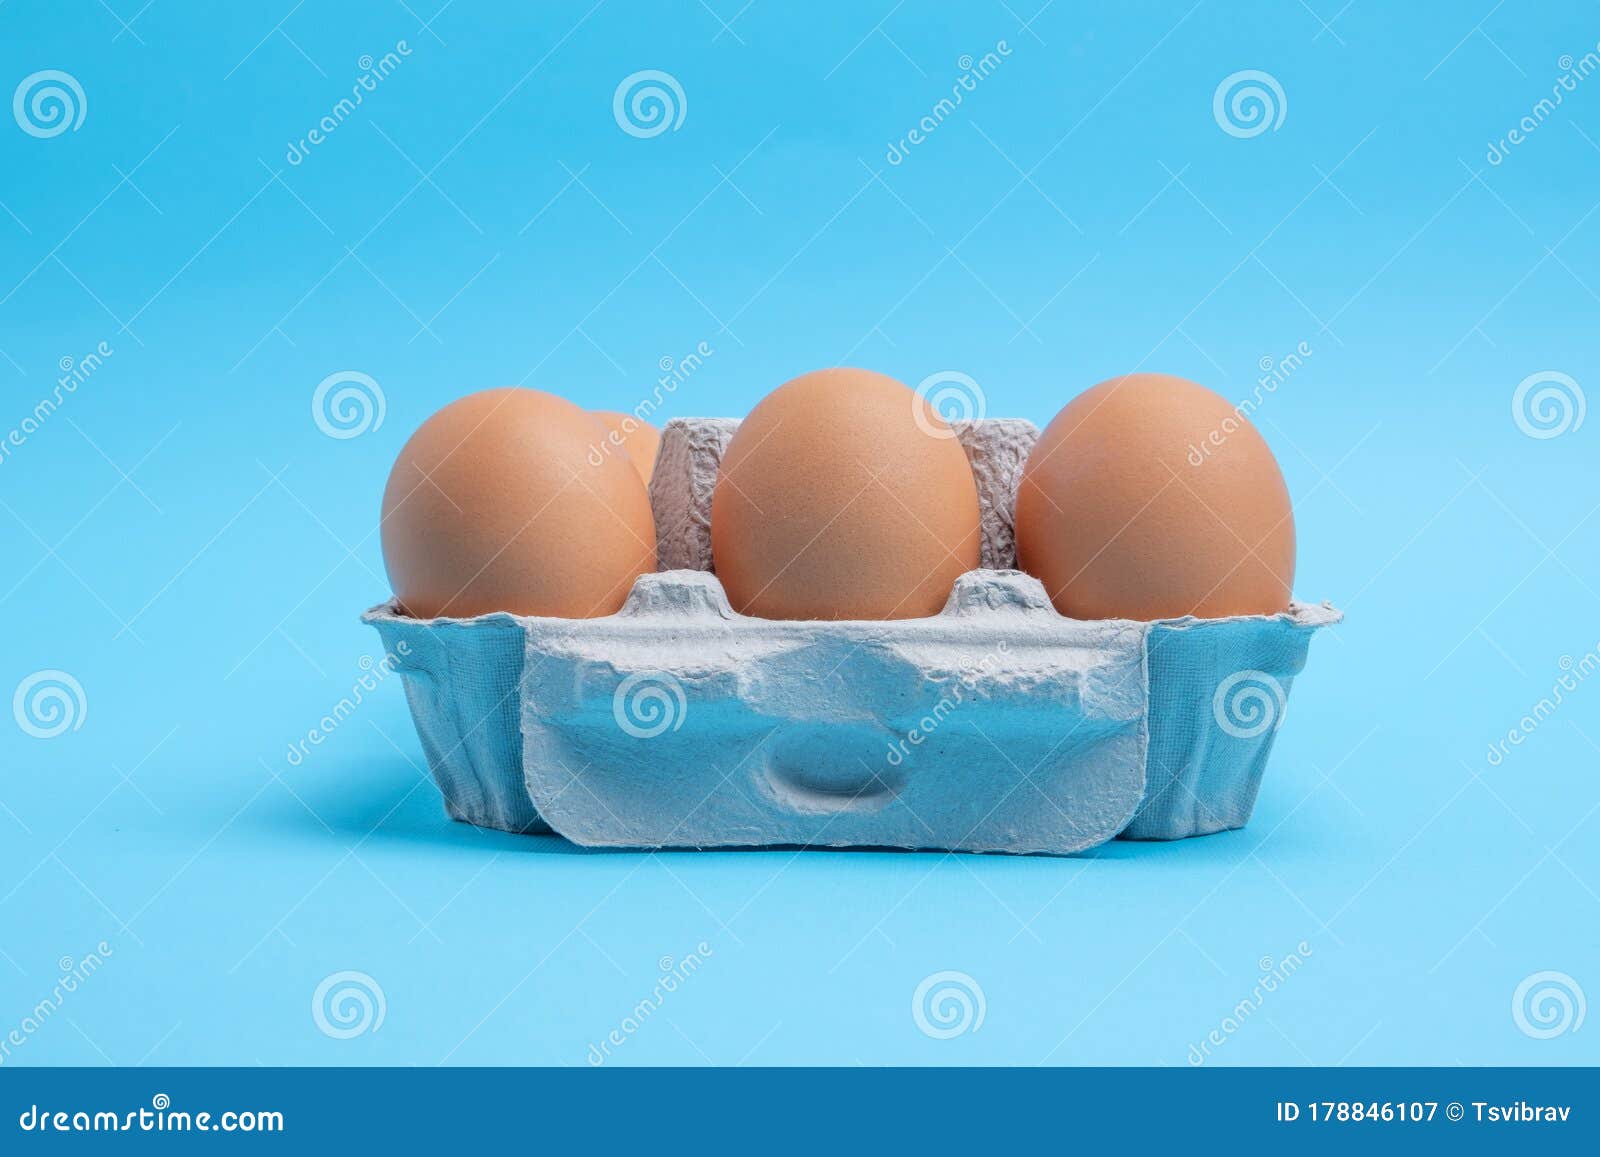 Download 311 Six Pack Eggs Photos Free Royalty Free Stock Photos From Dreamstime Yellowimages Mockups